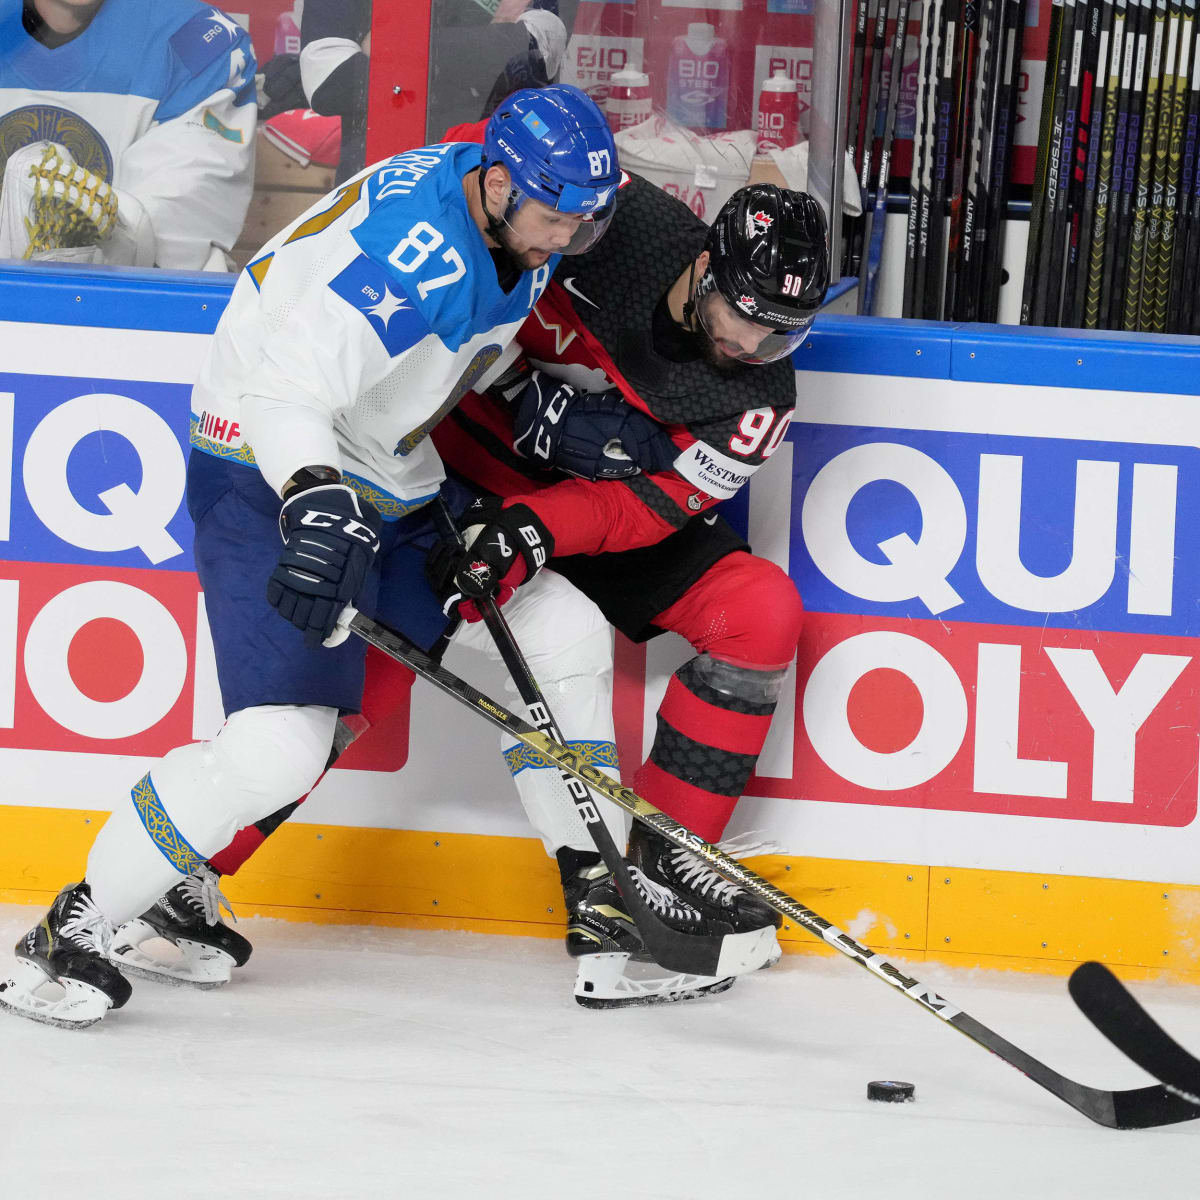 Watch Slovakia vs Kazakhstan Stream IIHF World Championship live - How to Watch and Stream Major League and College Sports